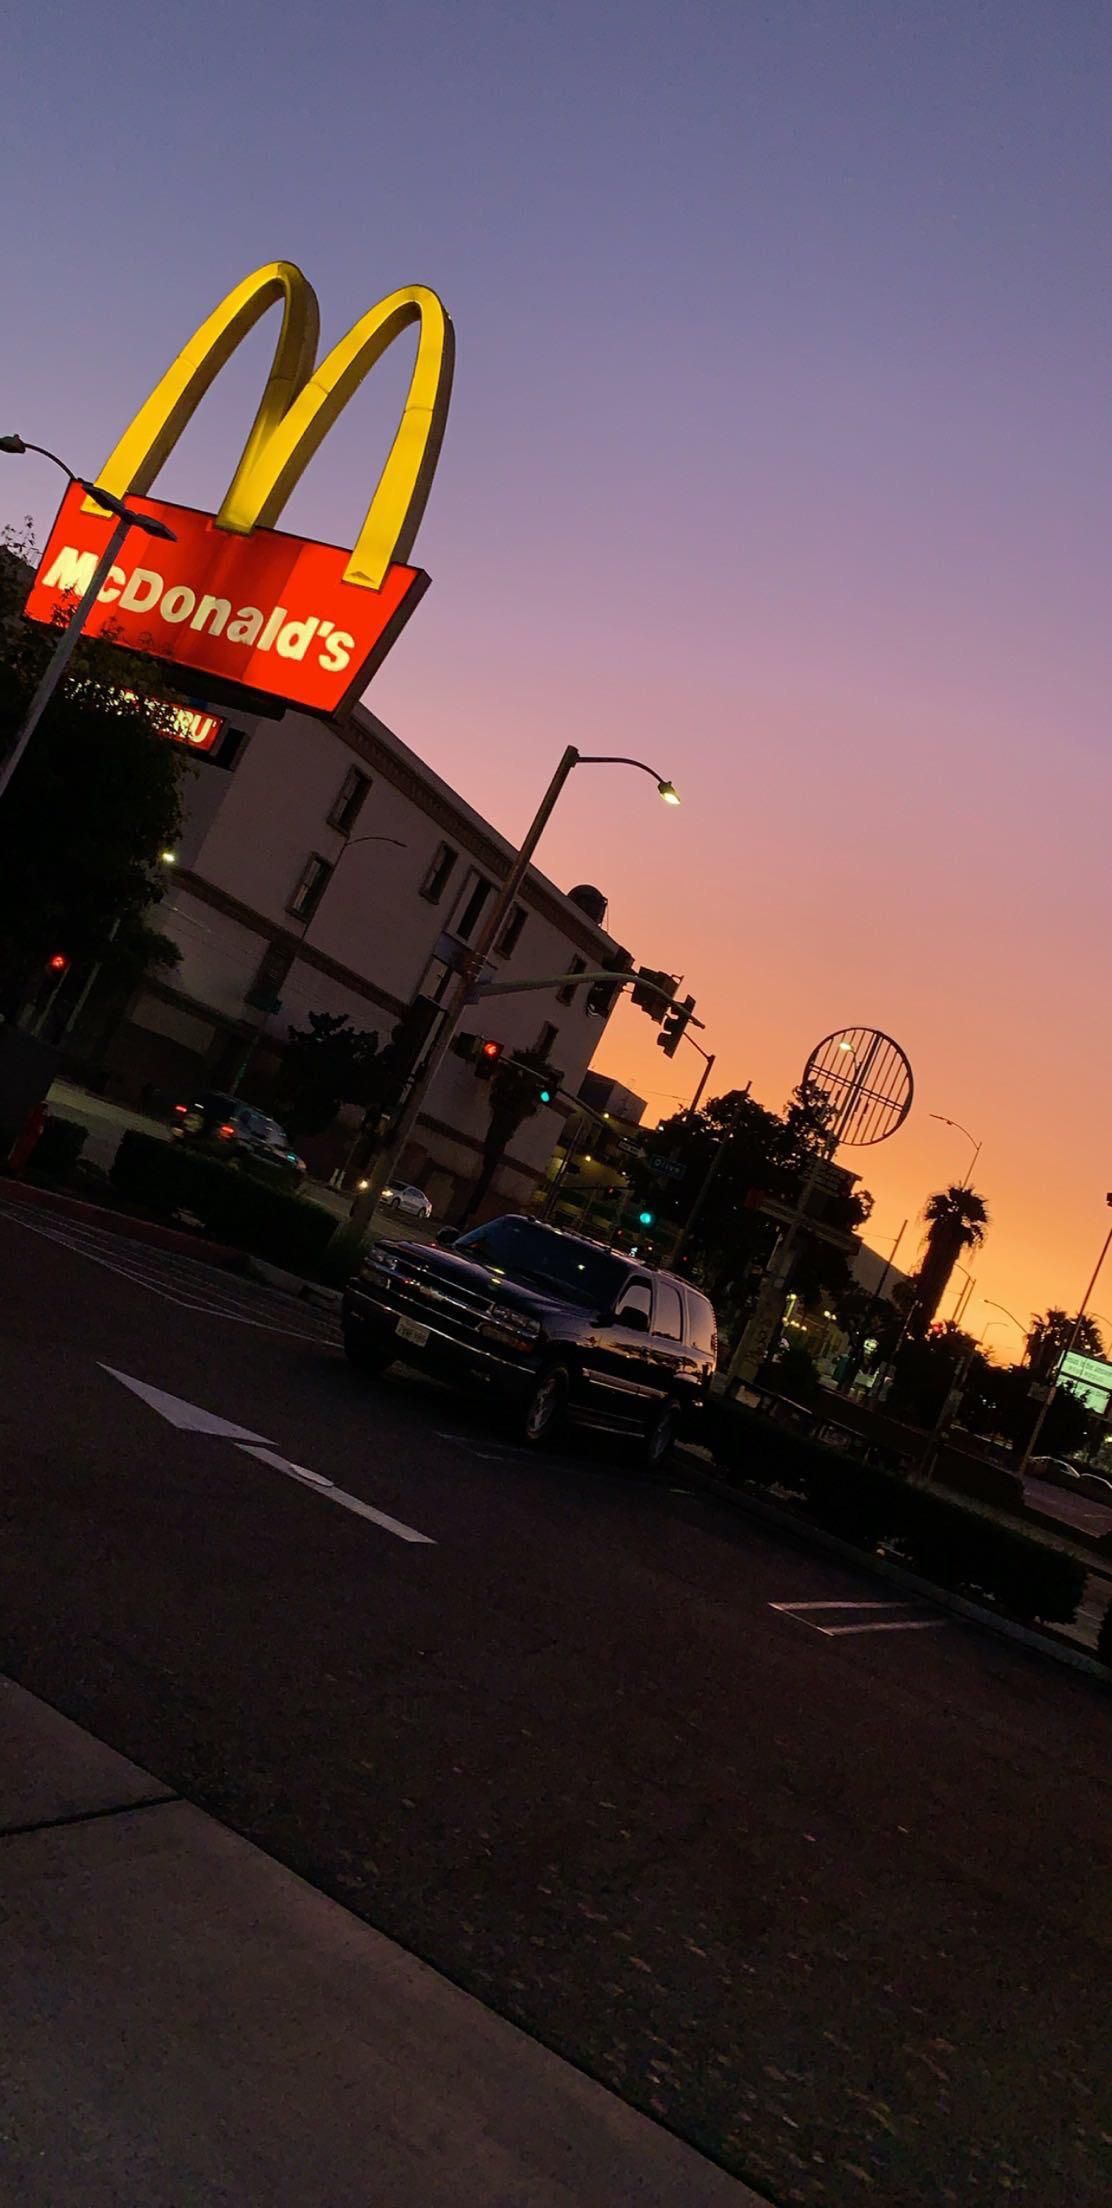  McDonald's Hintergrundbild 1112x2208. ITAP of the sunset and a McDonalds sign.#PHOTO #CAPTURE #NATURE #INCREDIBLE. Sky aesthetic, Cool instagram picture, Scenery wallpaper